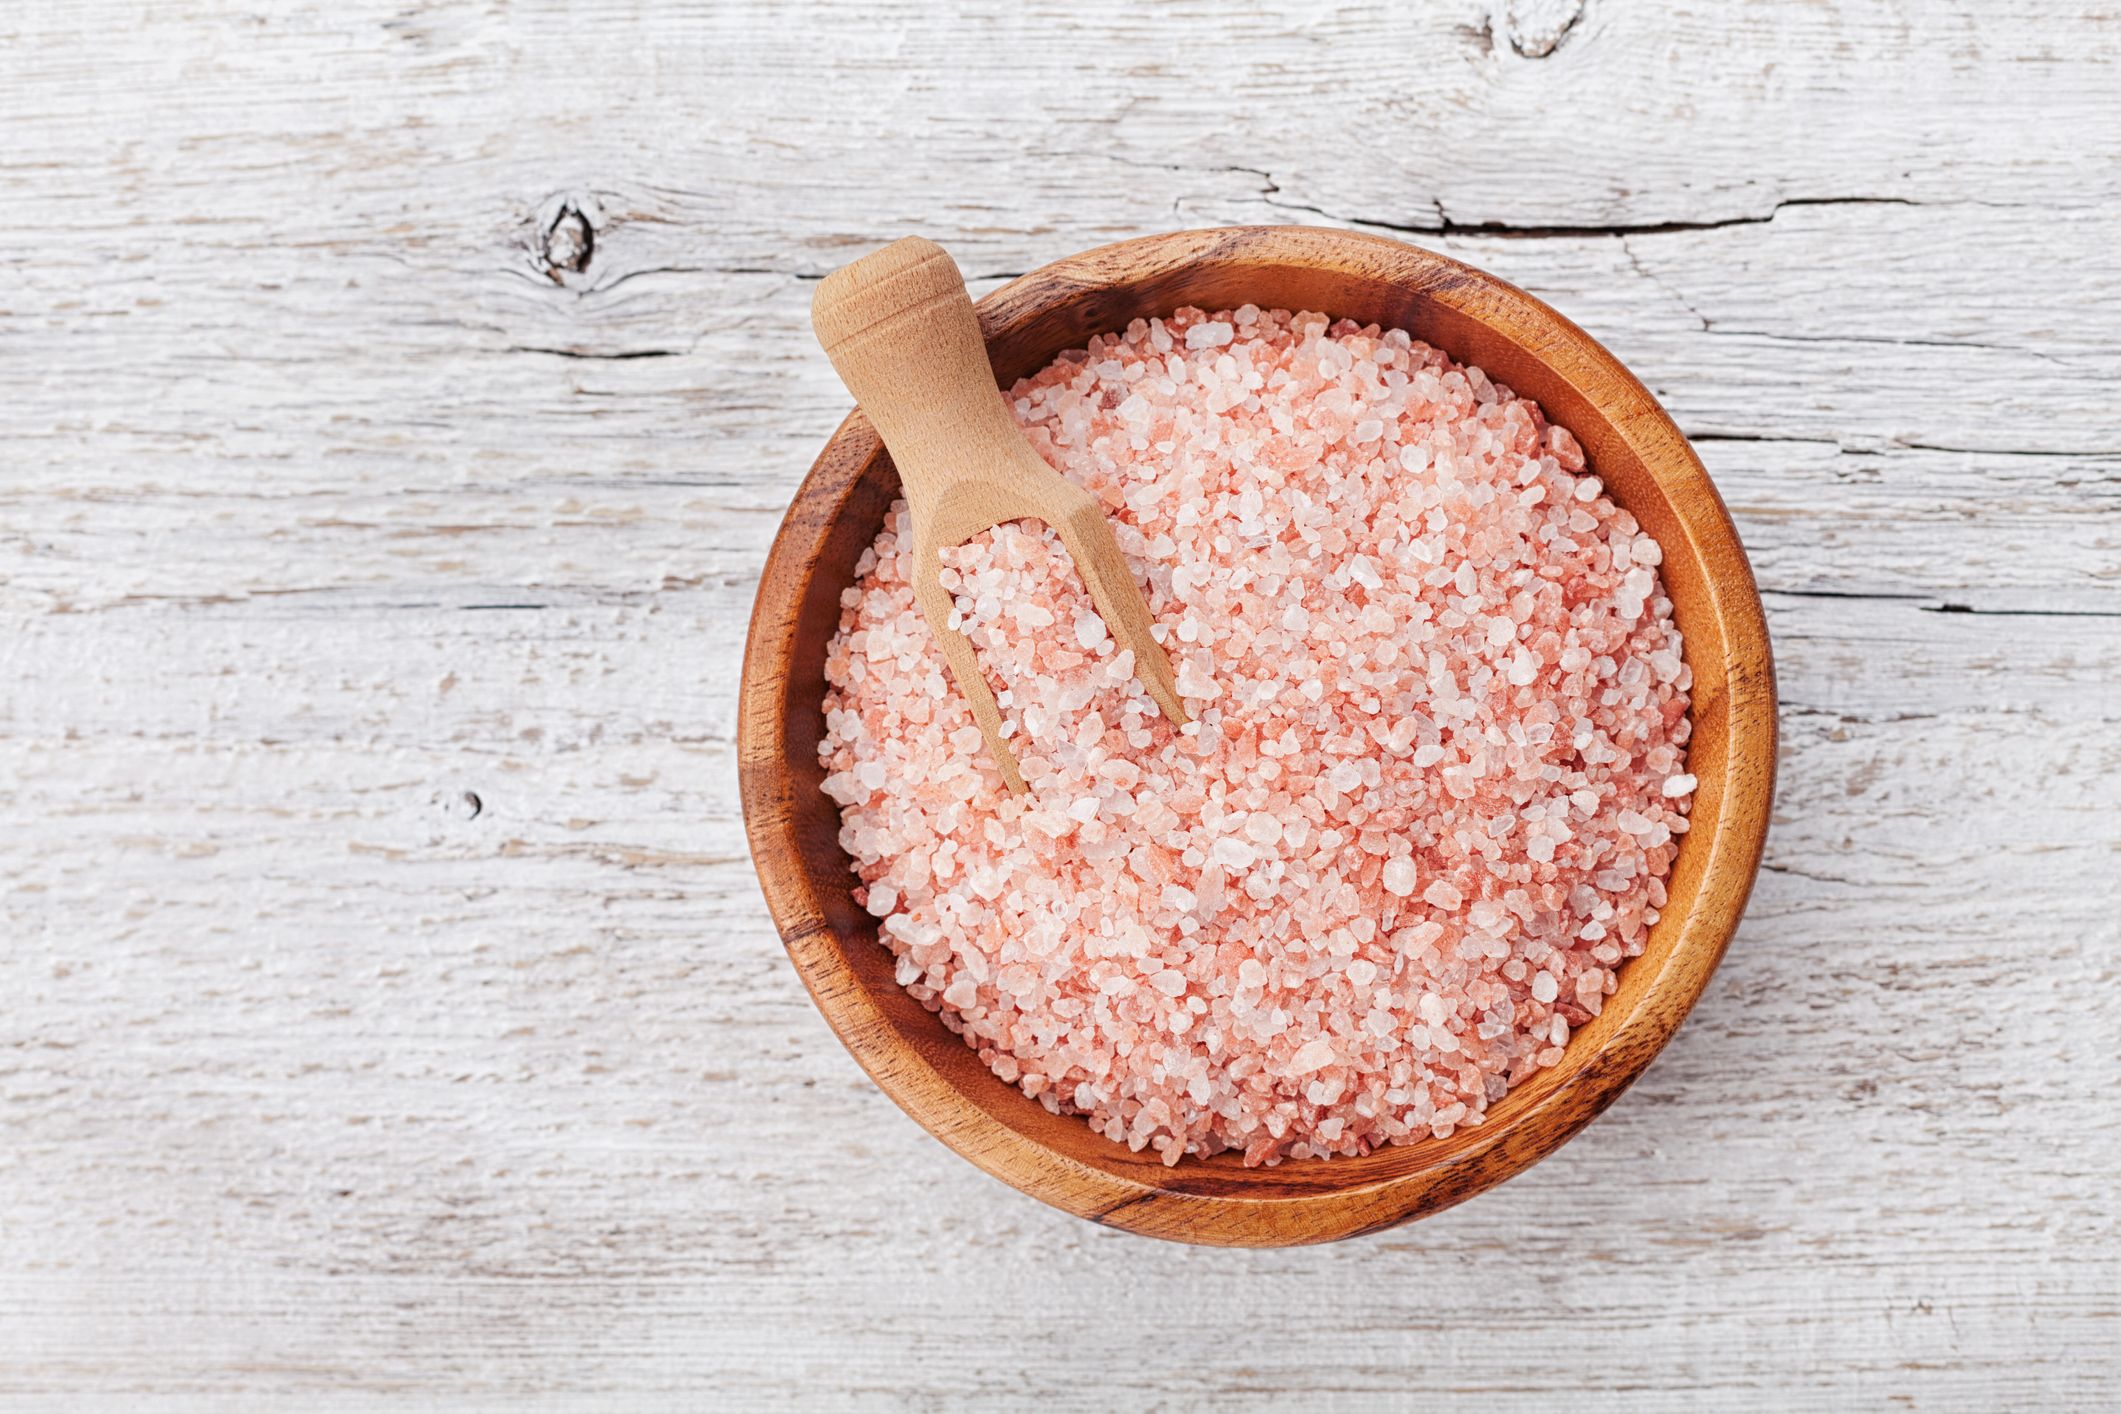 Himalayan Pink Salt - What is all the hype about? benefit himalayan